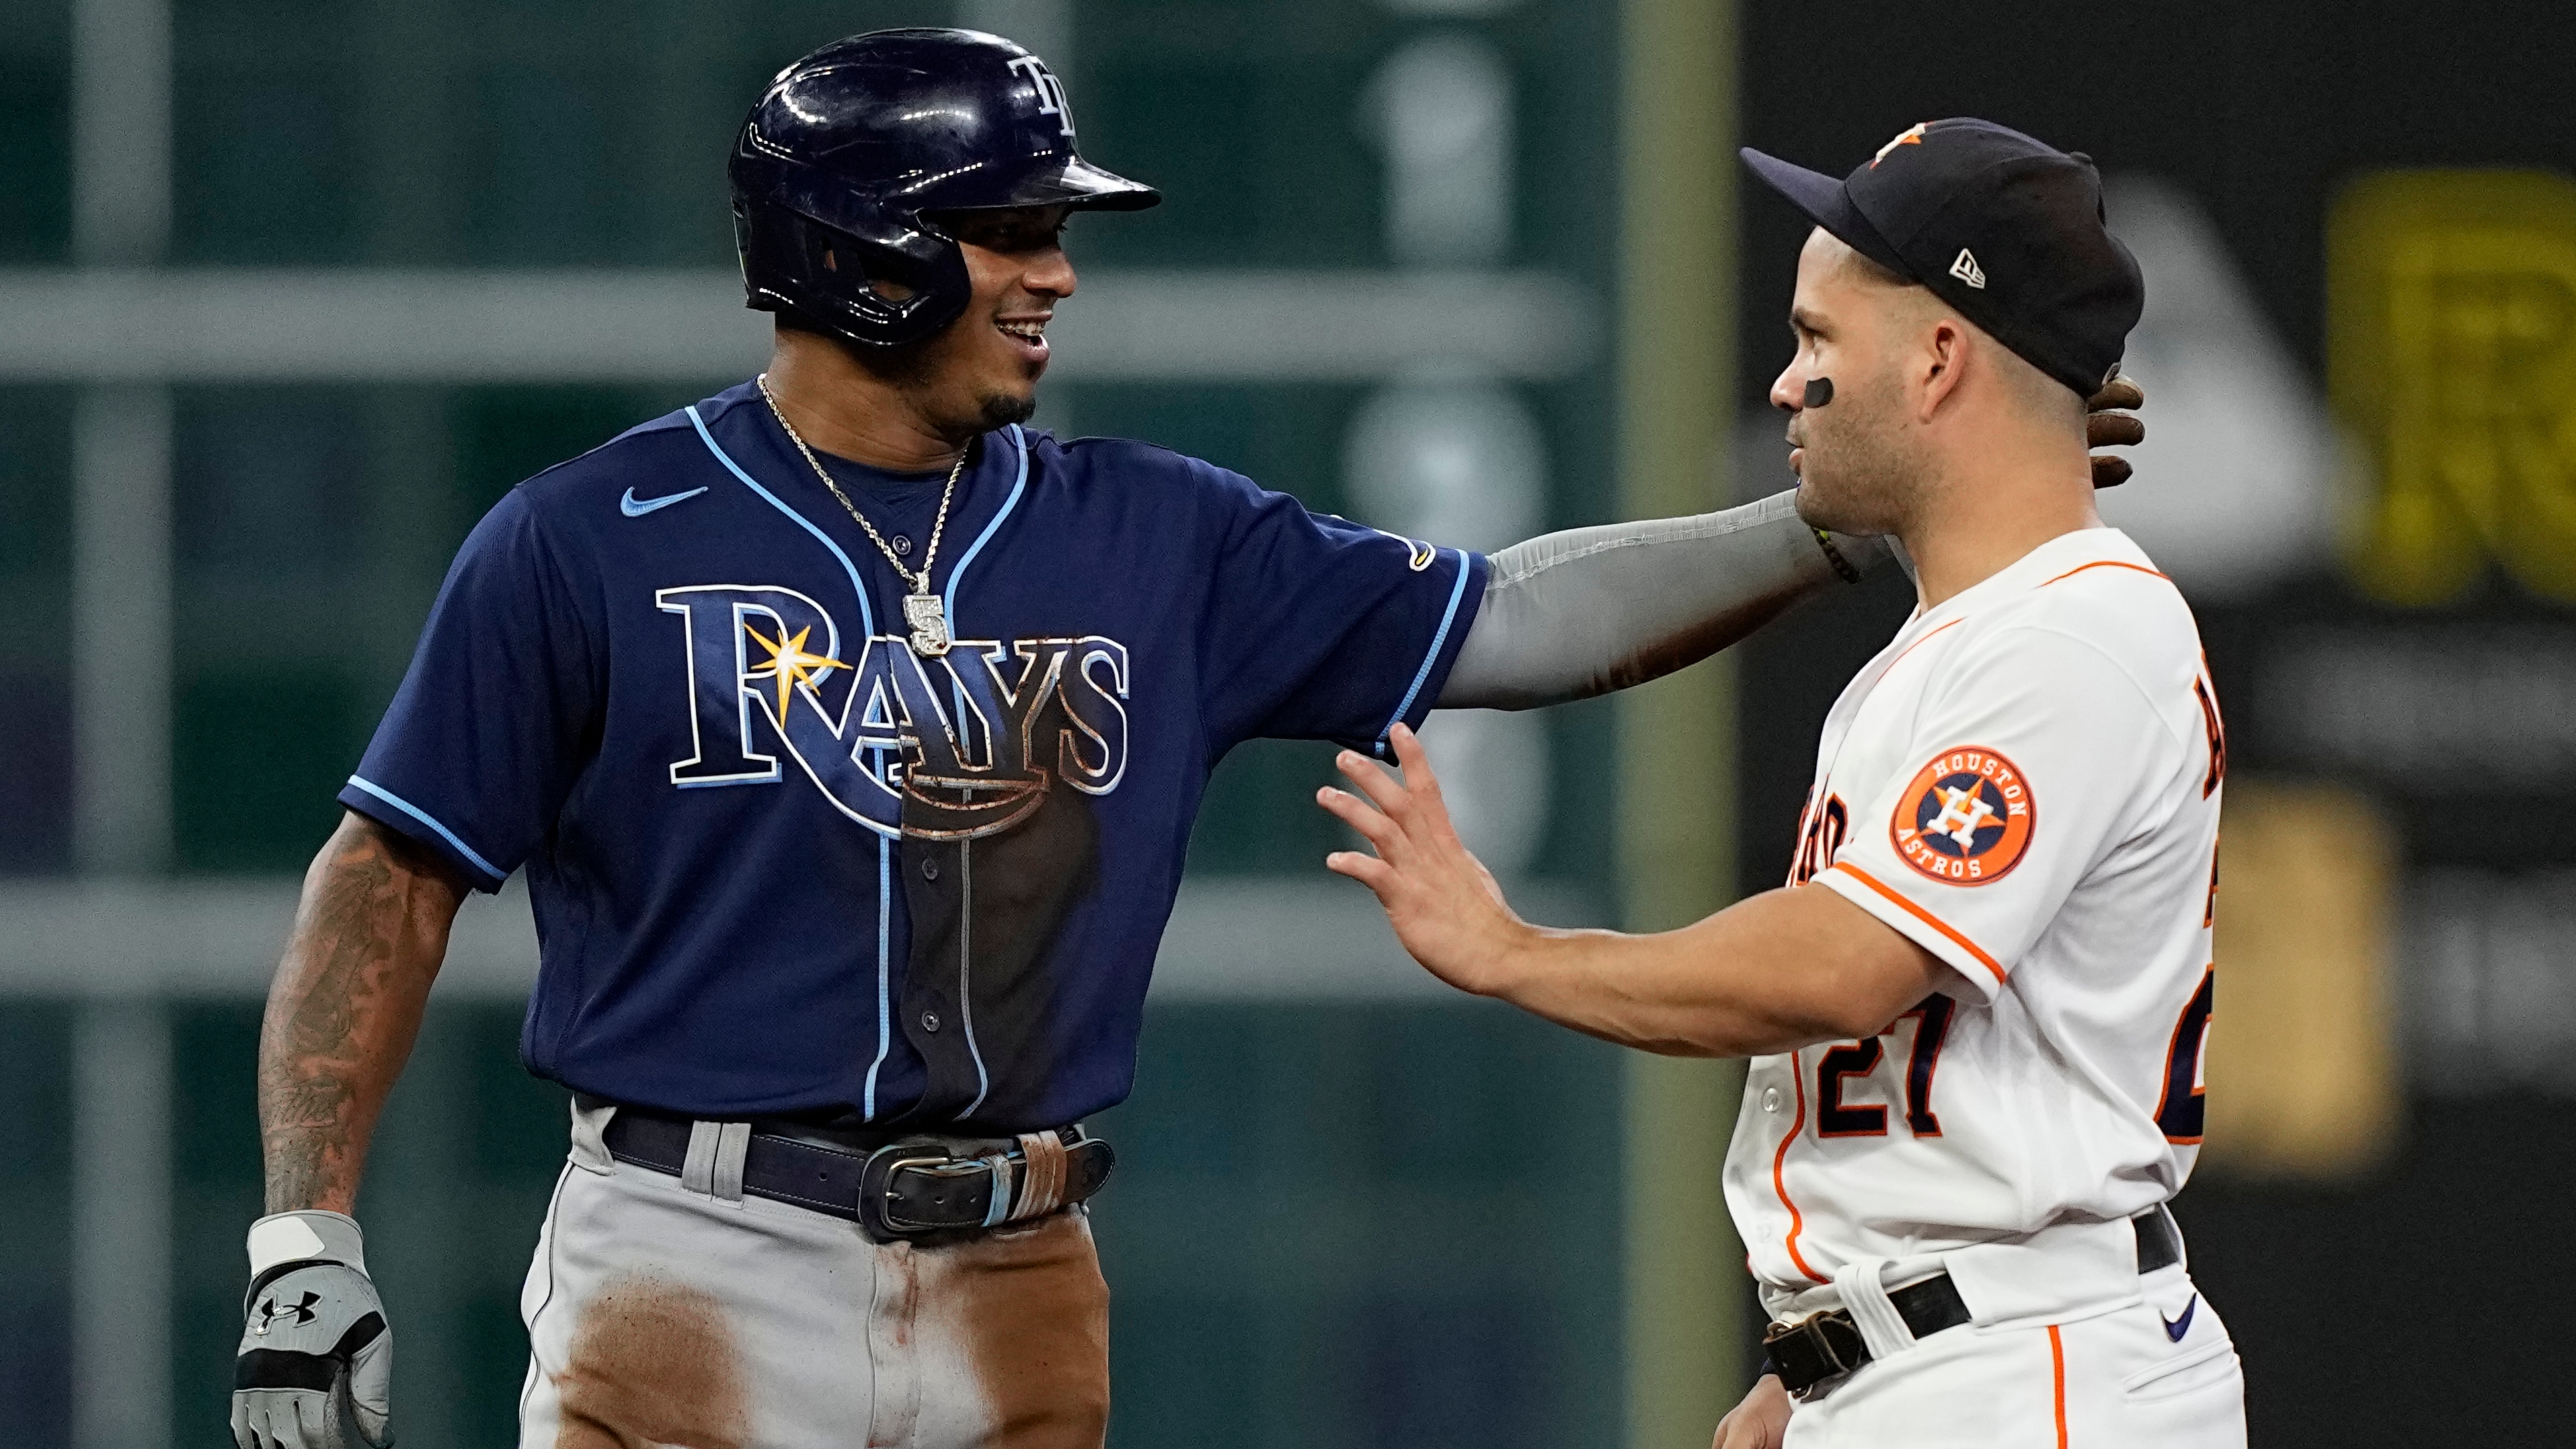 No wonder at 20, Rays' Wander Franco is quite a hit